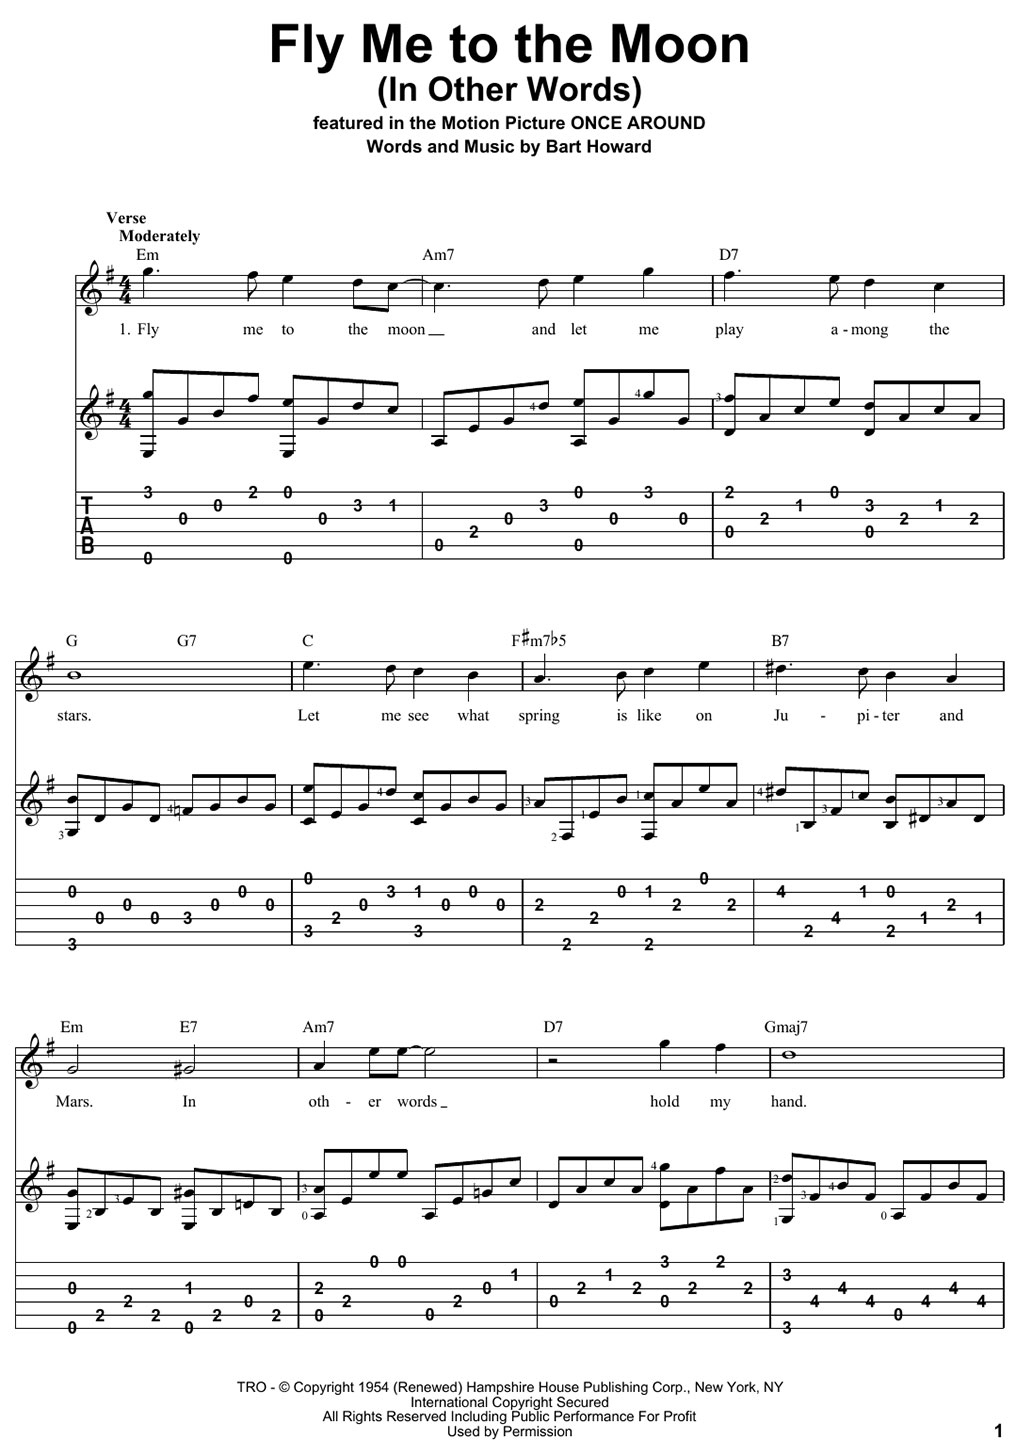 flt me to the moon sheet music notes